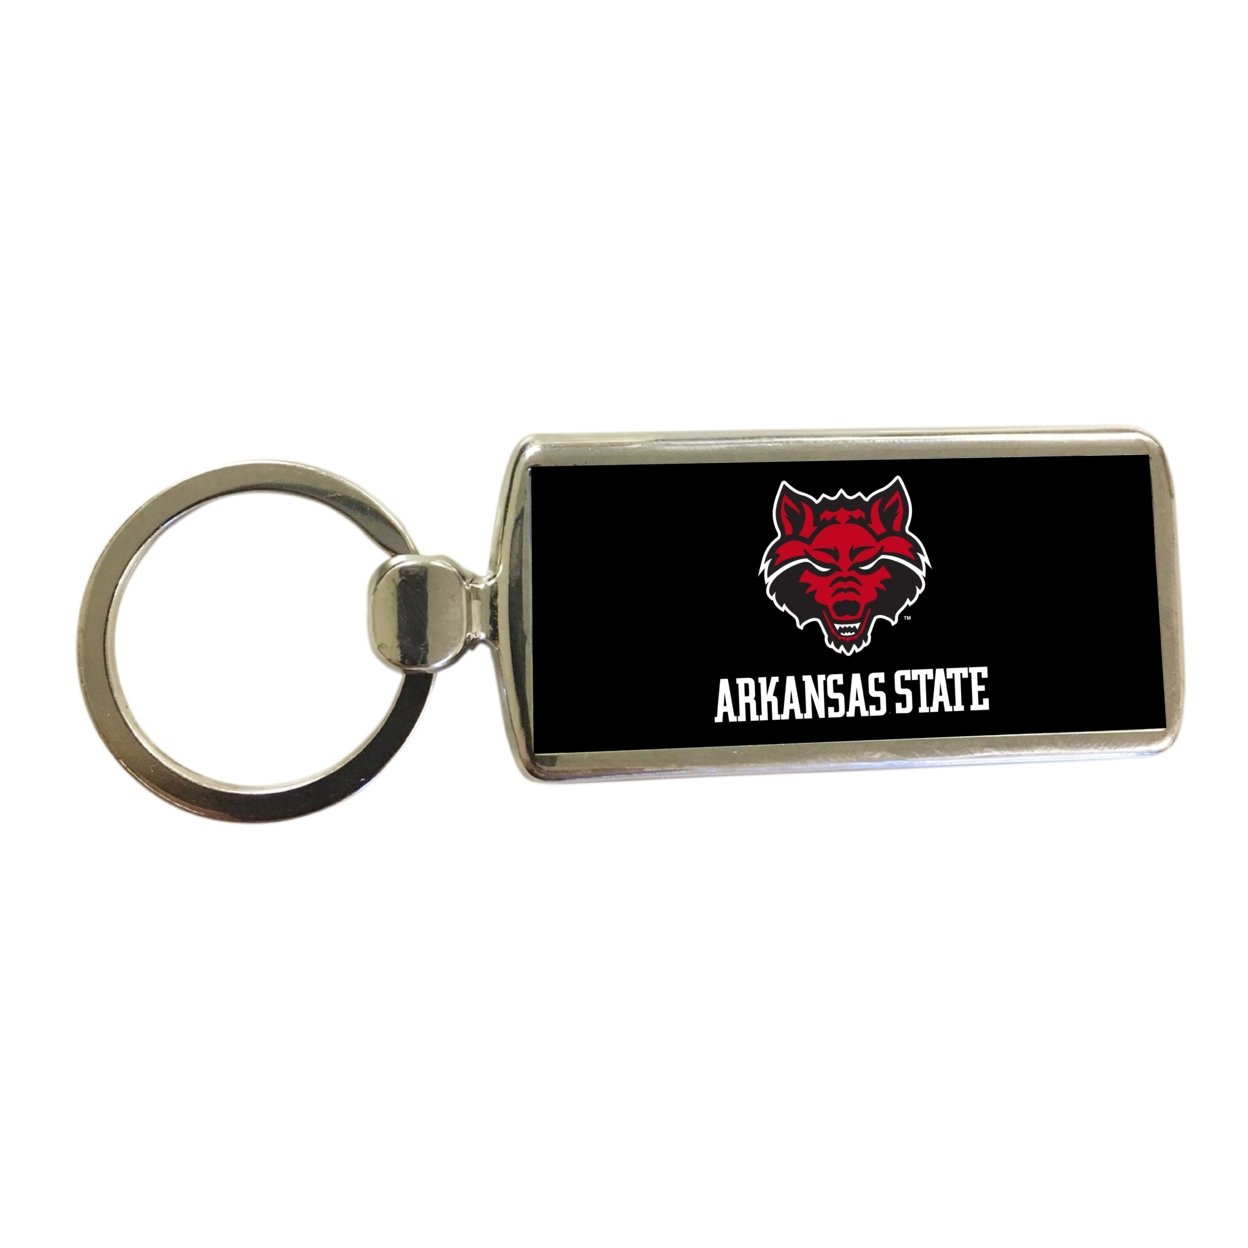 R and R Imports Arkansas State Metal Keychain